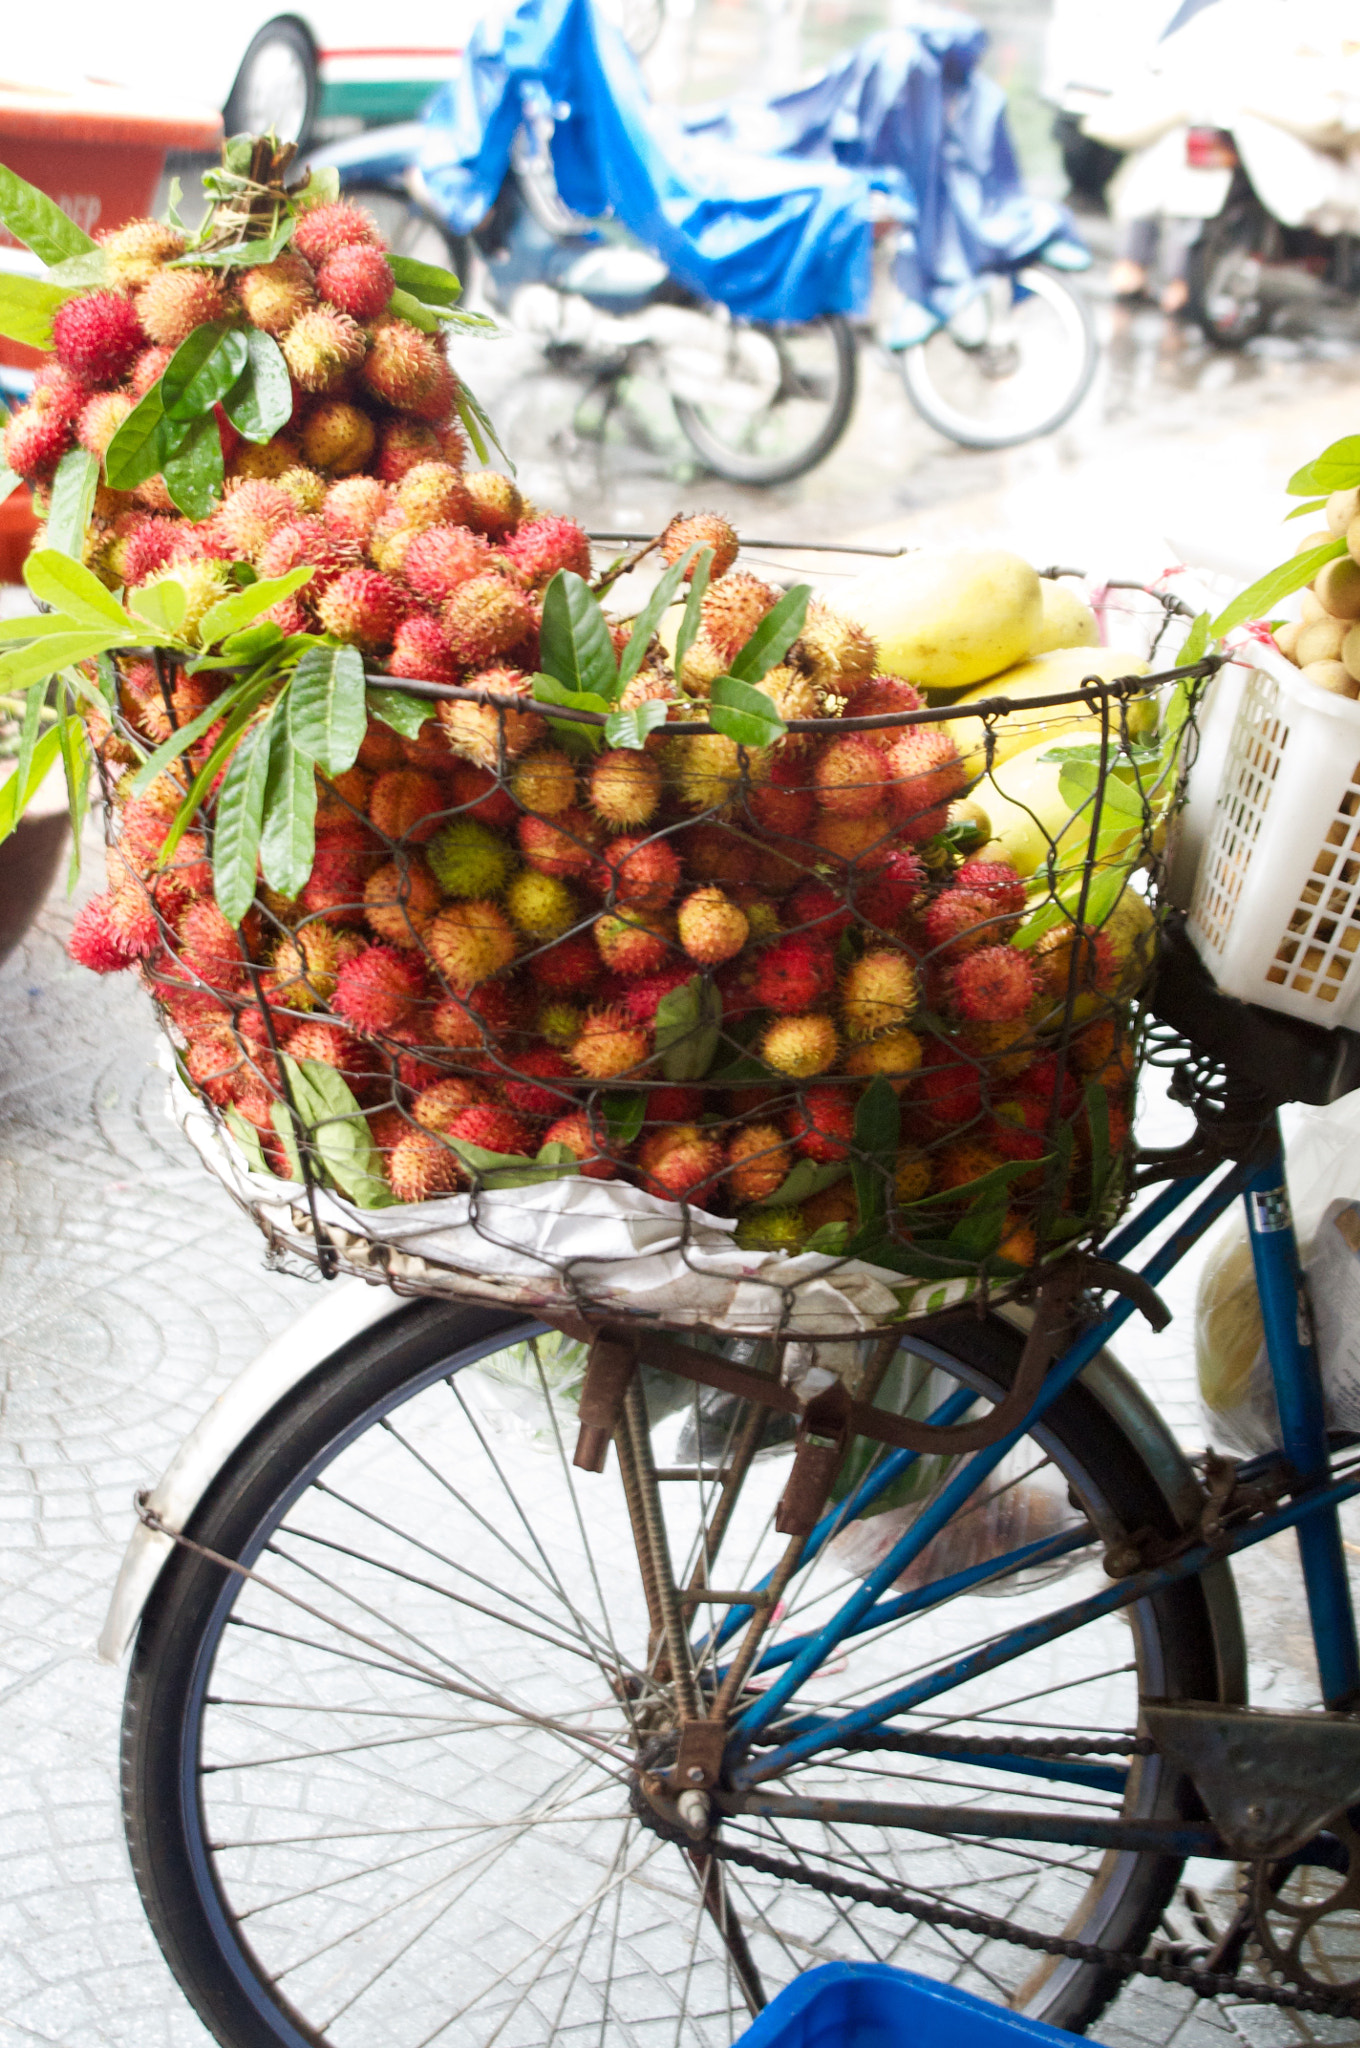 Pentax K-x sample photo. Bicycle and fruit photography